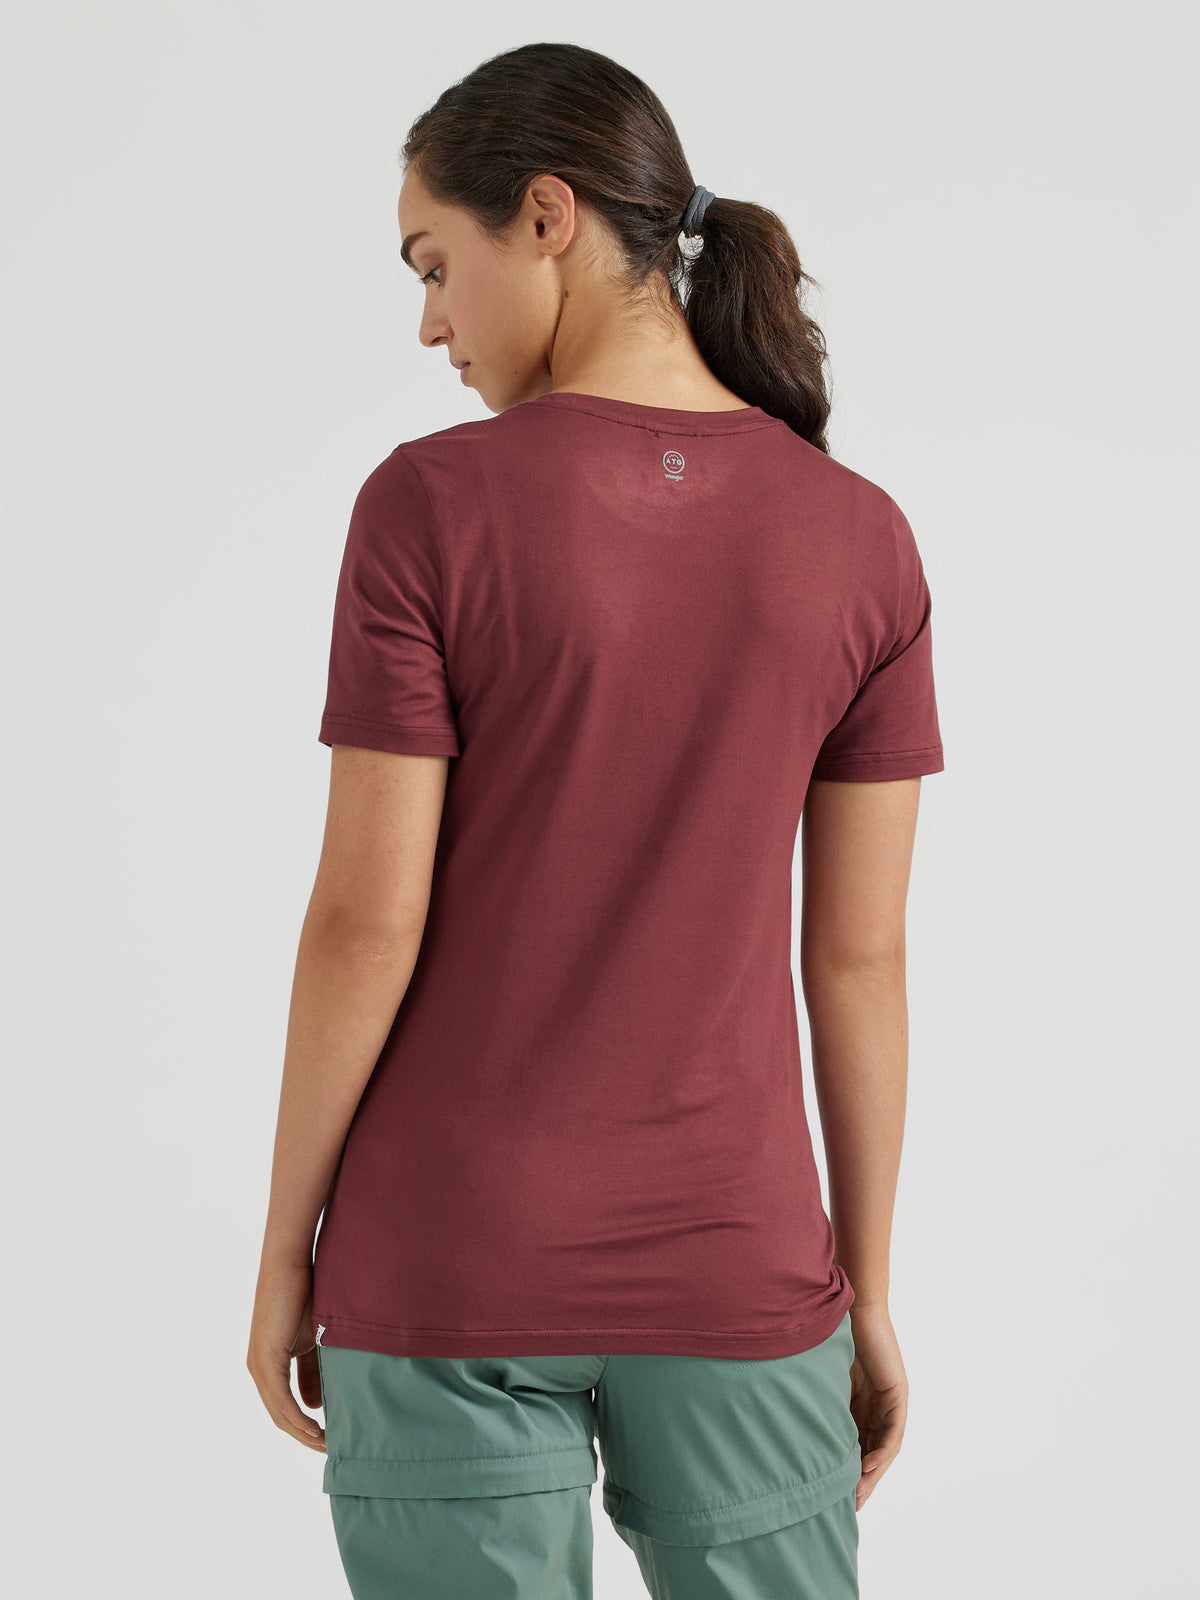 Performance Tee in Red Mahogany